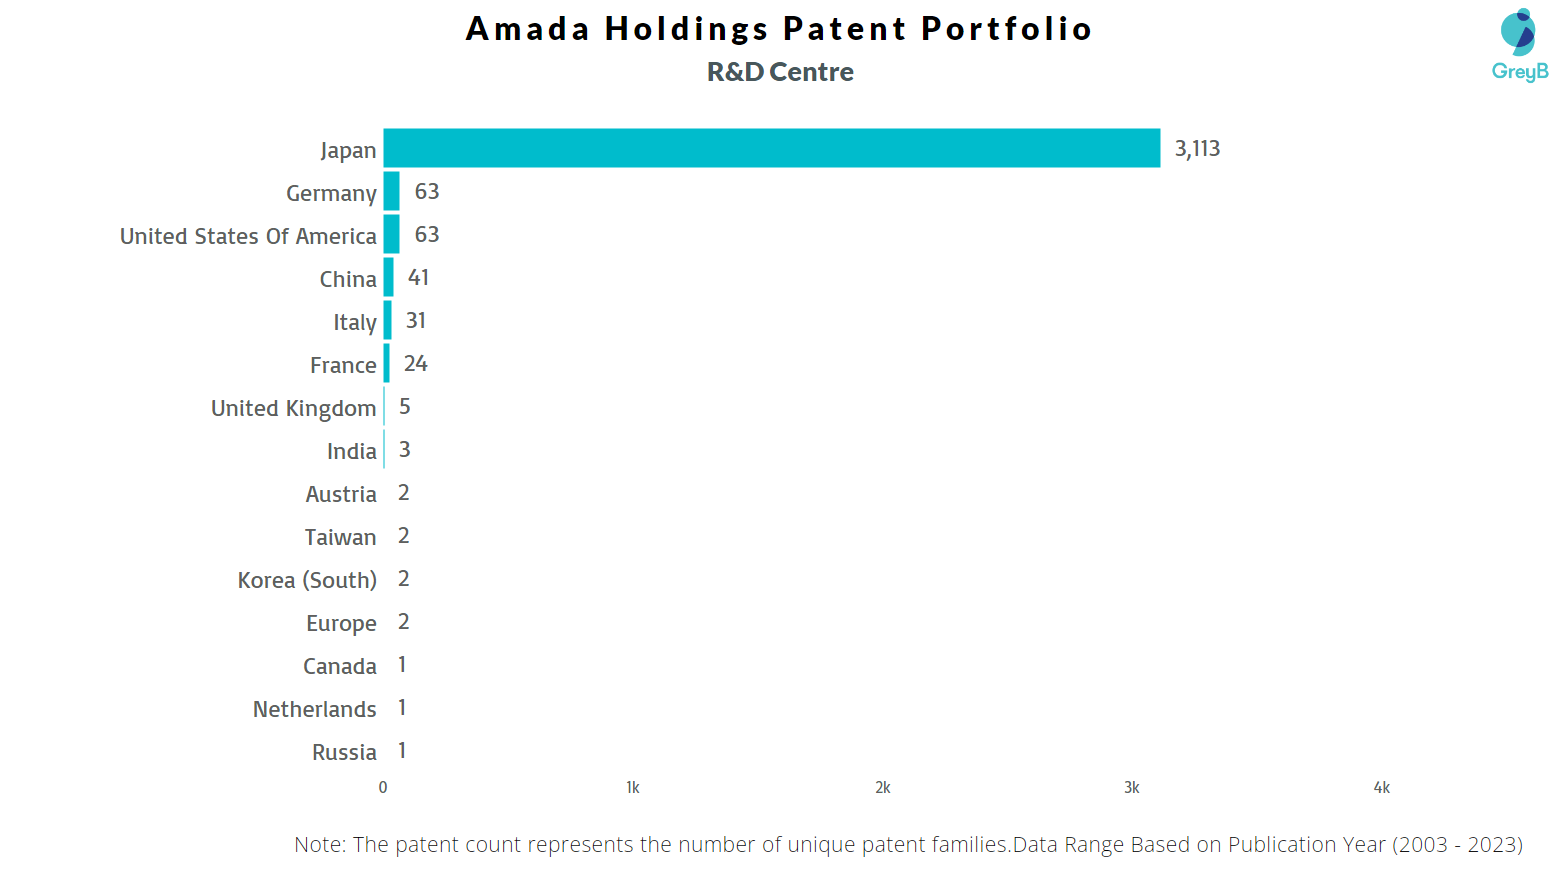 R&D Centers of Amada Holdings